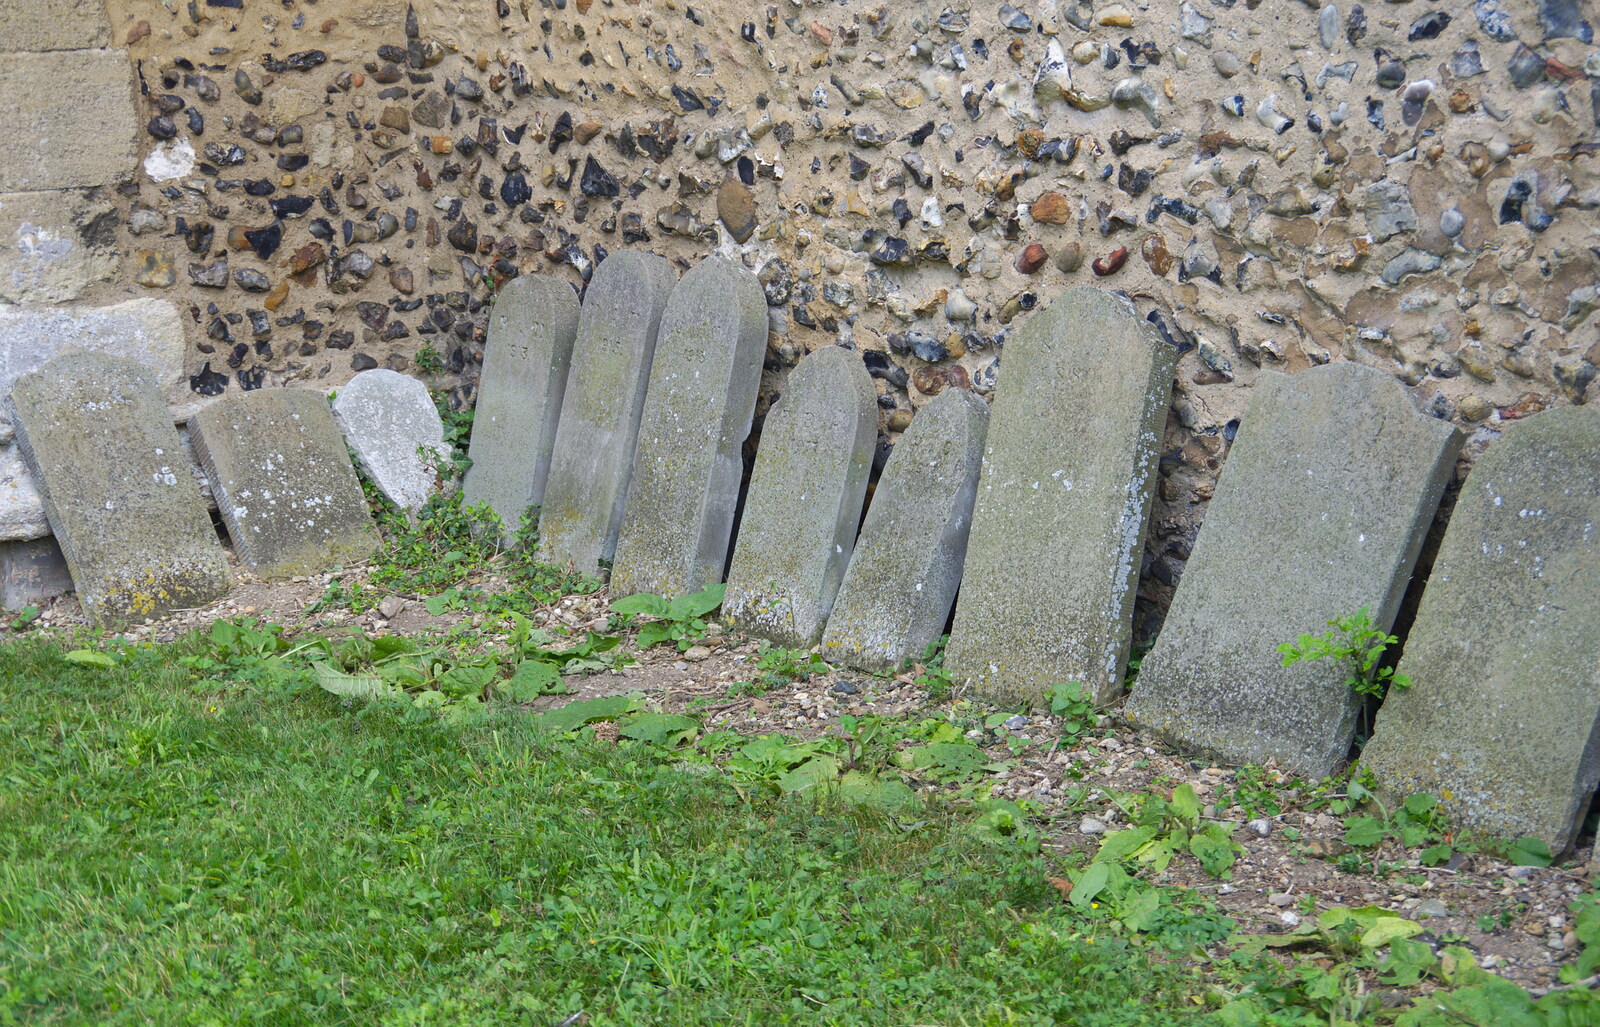 Gravestones lean on the church wall from The Shakesbeer Festival, Star Wing Brewery, Redgrave, Suffolk - 13th July 2019